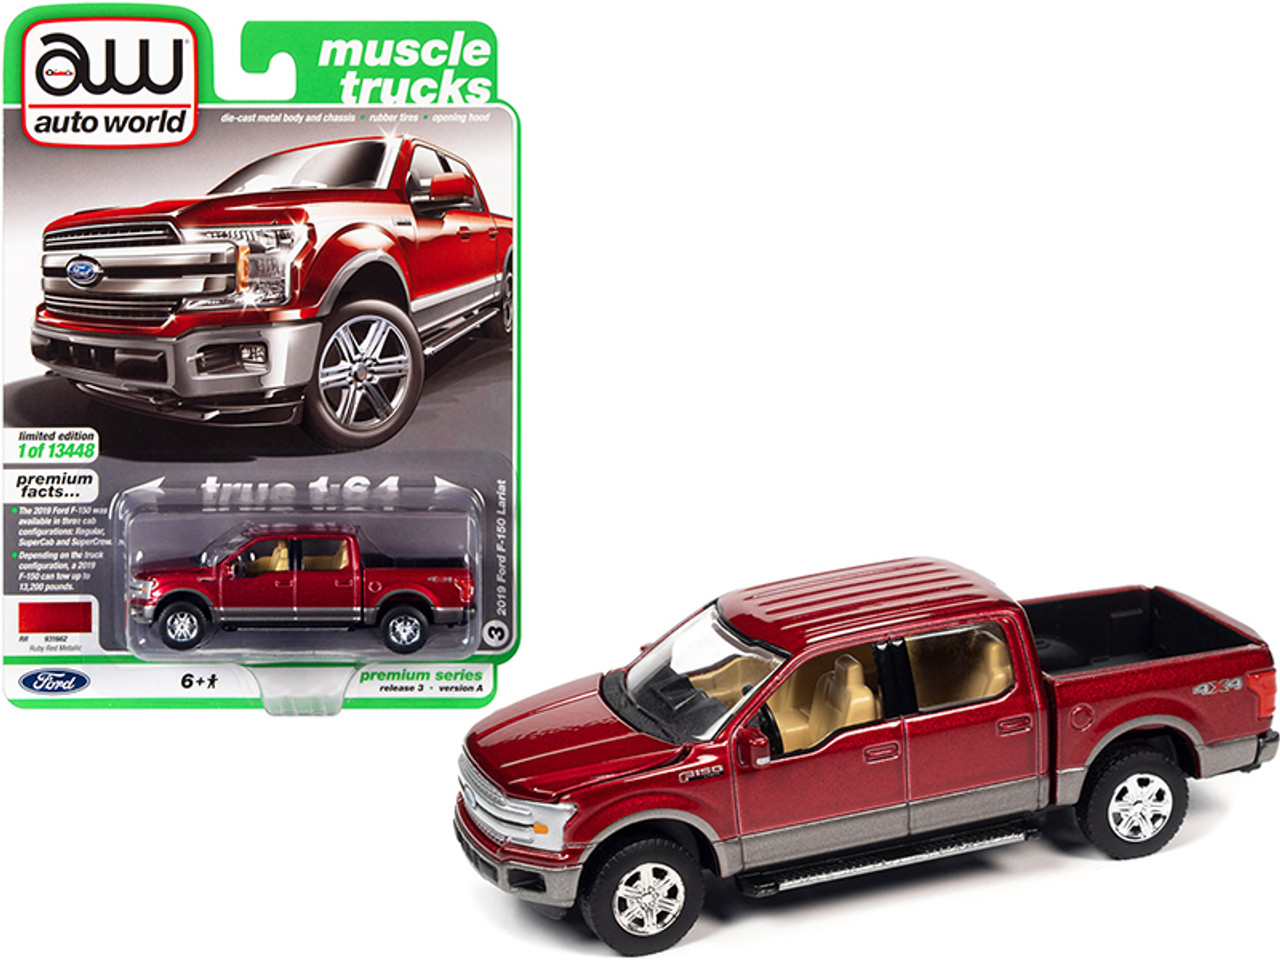 2019 Ford F-150 Lariat 4x4 Pickup Truck Ruby Red Metallic and Magnetic Gray "Muscle Trucks" Limited Edition to 13448 pieces Worldwide 1/64 Diecast Model Car by Autoworld